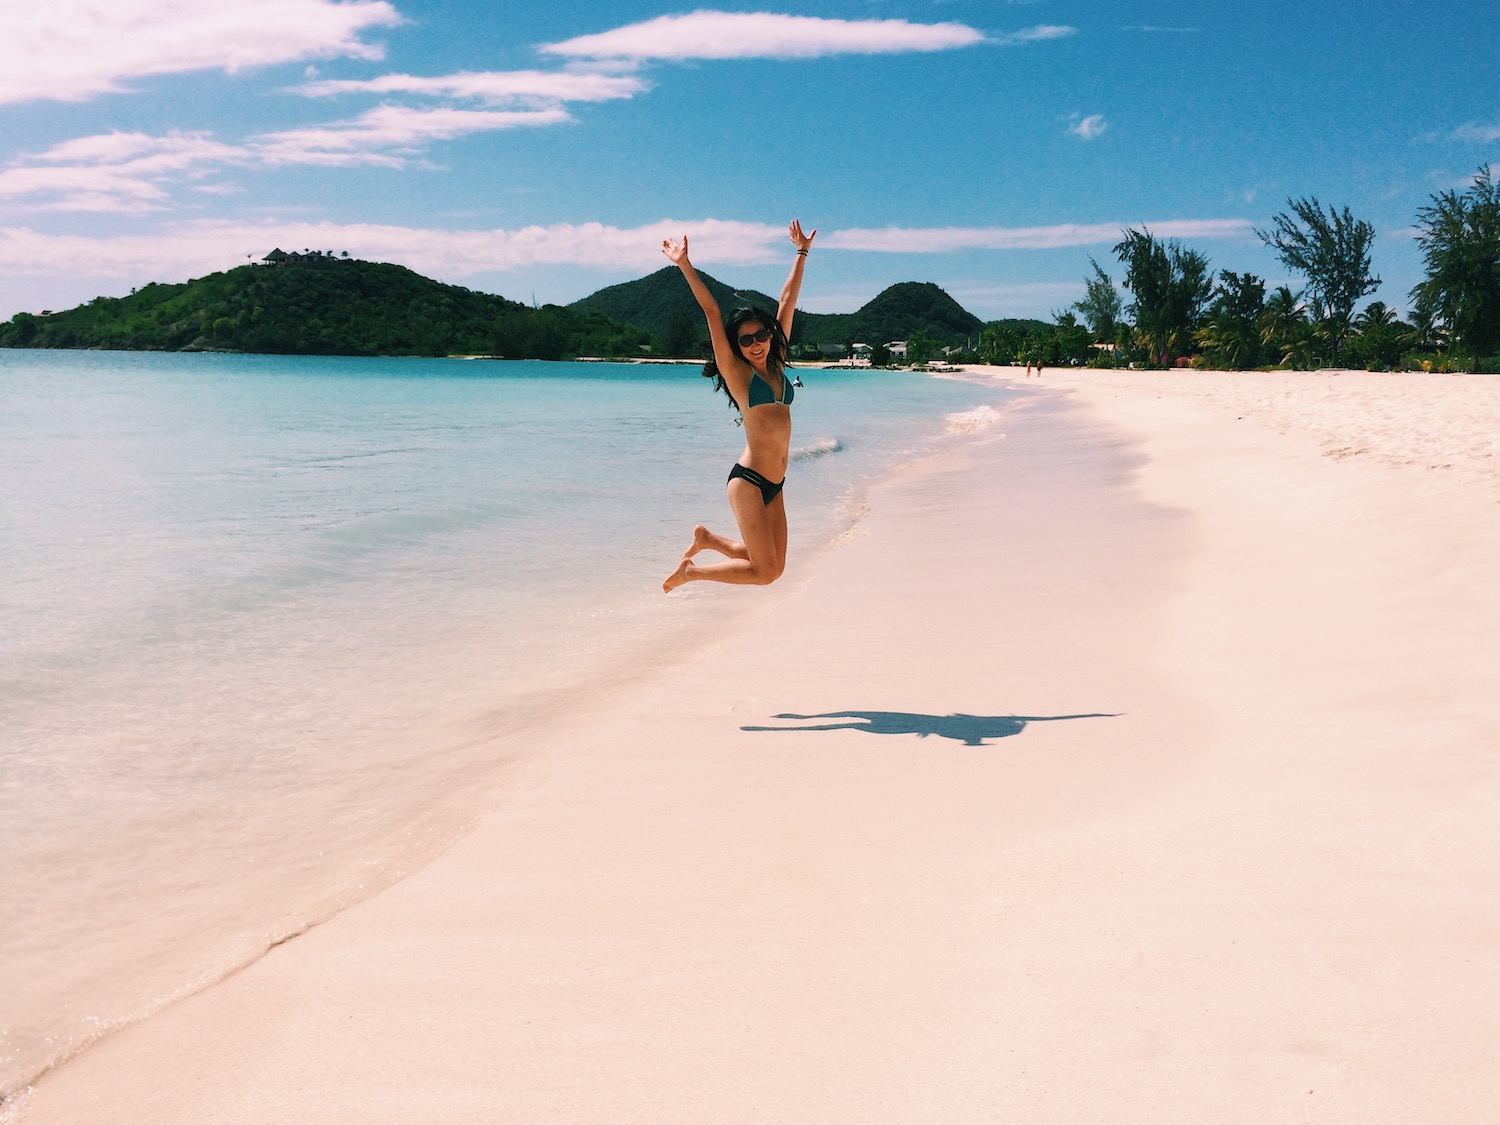 Jumping for joy on Jolly Beach in Antigua; background shows soft, white sand with electric blue waters and Caribbean mountains